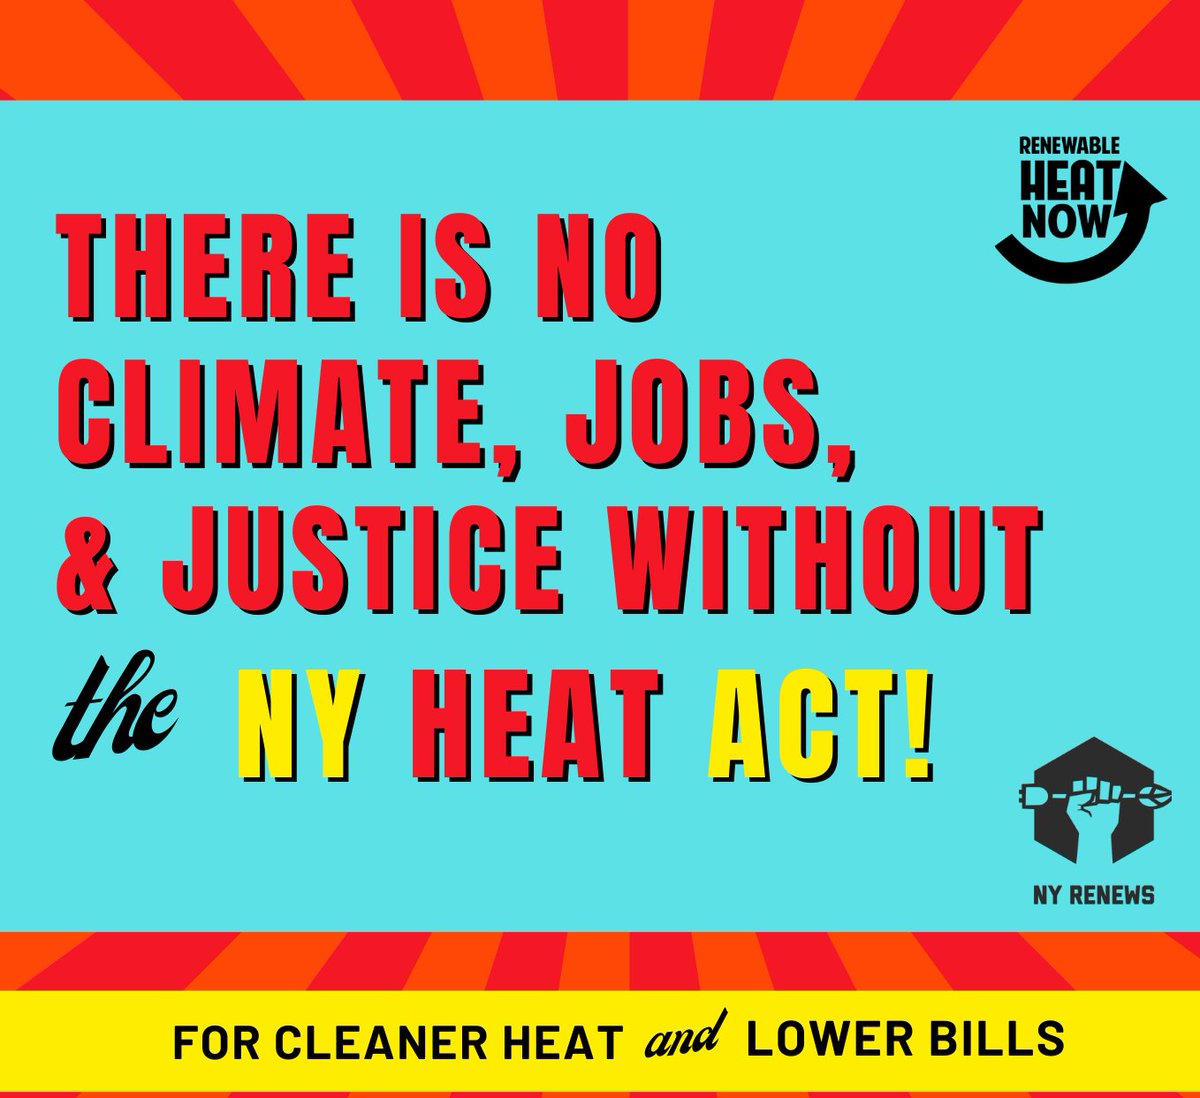 Outdated laws continue to prop up the toxic oil and gas industry, keeping us from the just future we deserve. This is the year we change that! Let’s get #NYHEAT across the finish line for #CleanerHeatLowerBills. Are you with us? @CarlHeastie @DeborahJGlick @kenzebrowski_ny